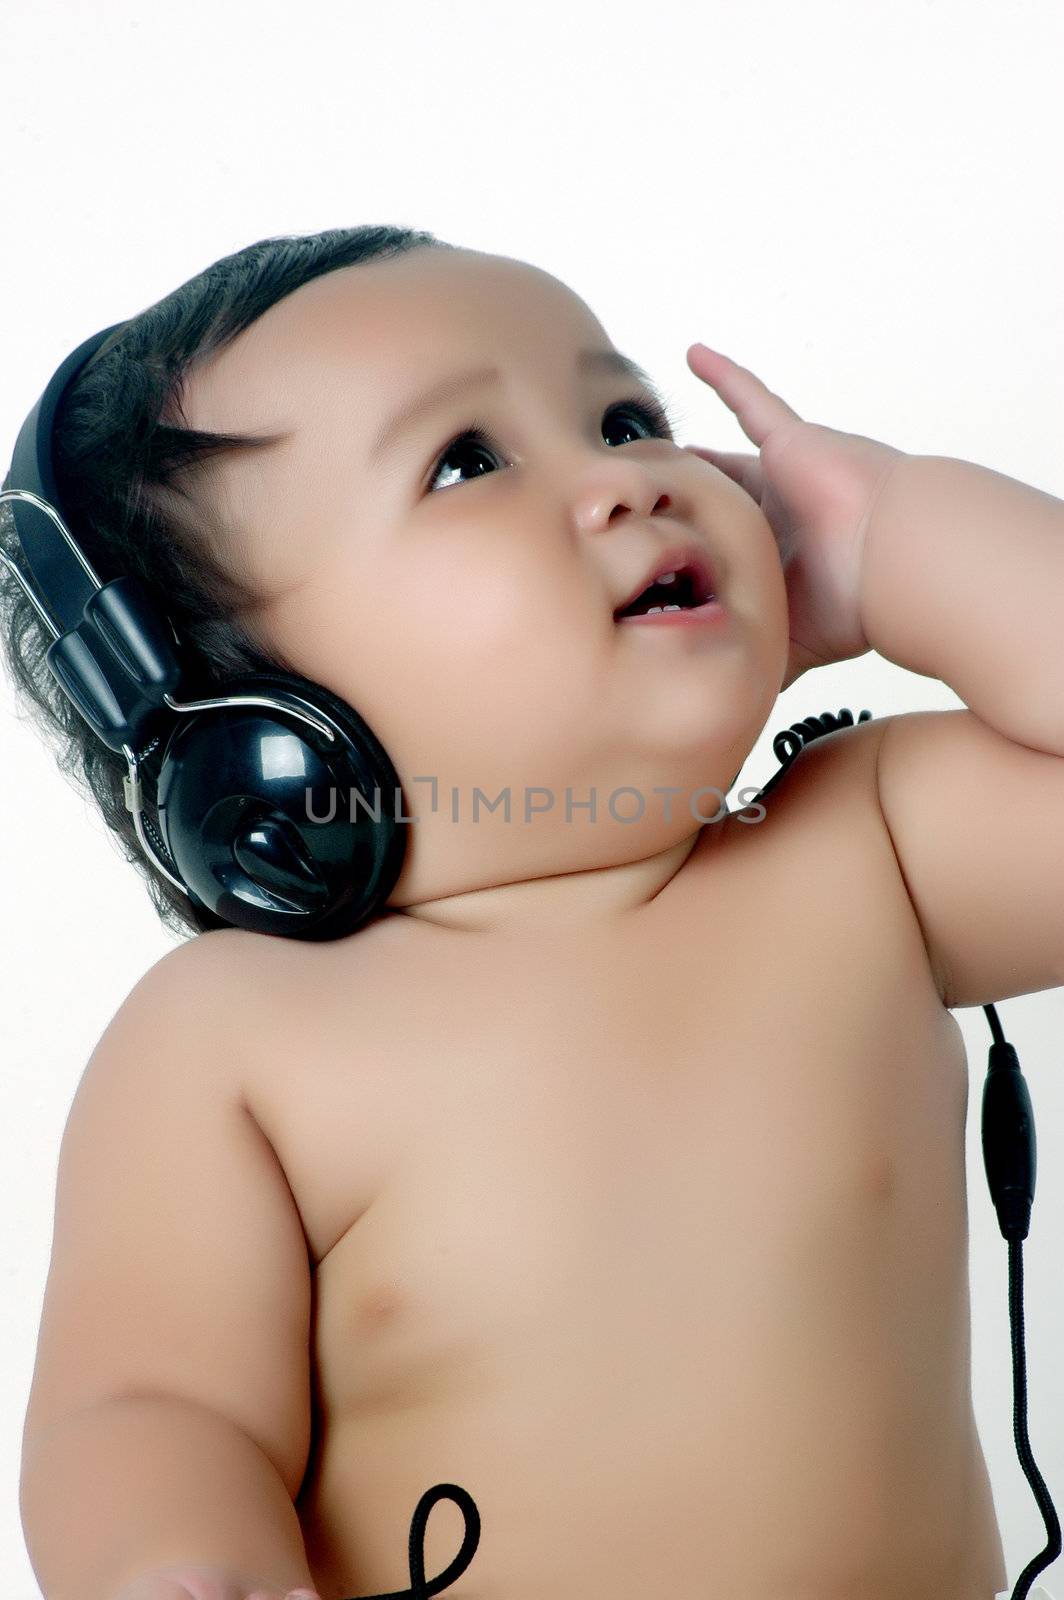 a chubby little girl listen to music with headphones by antonihalim